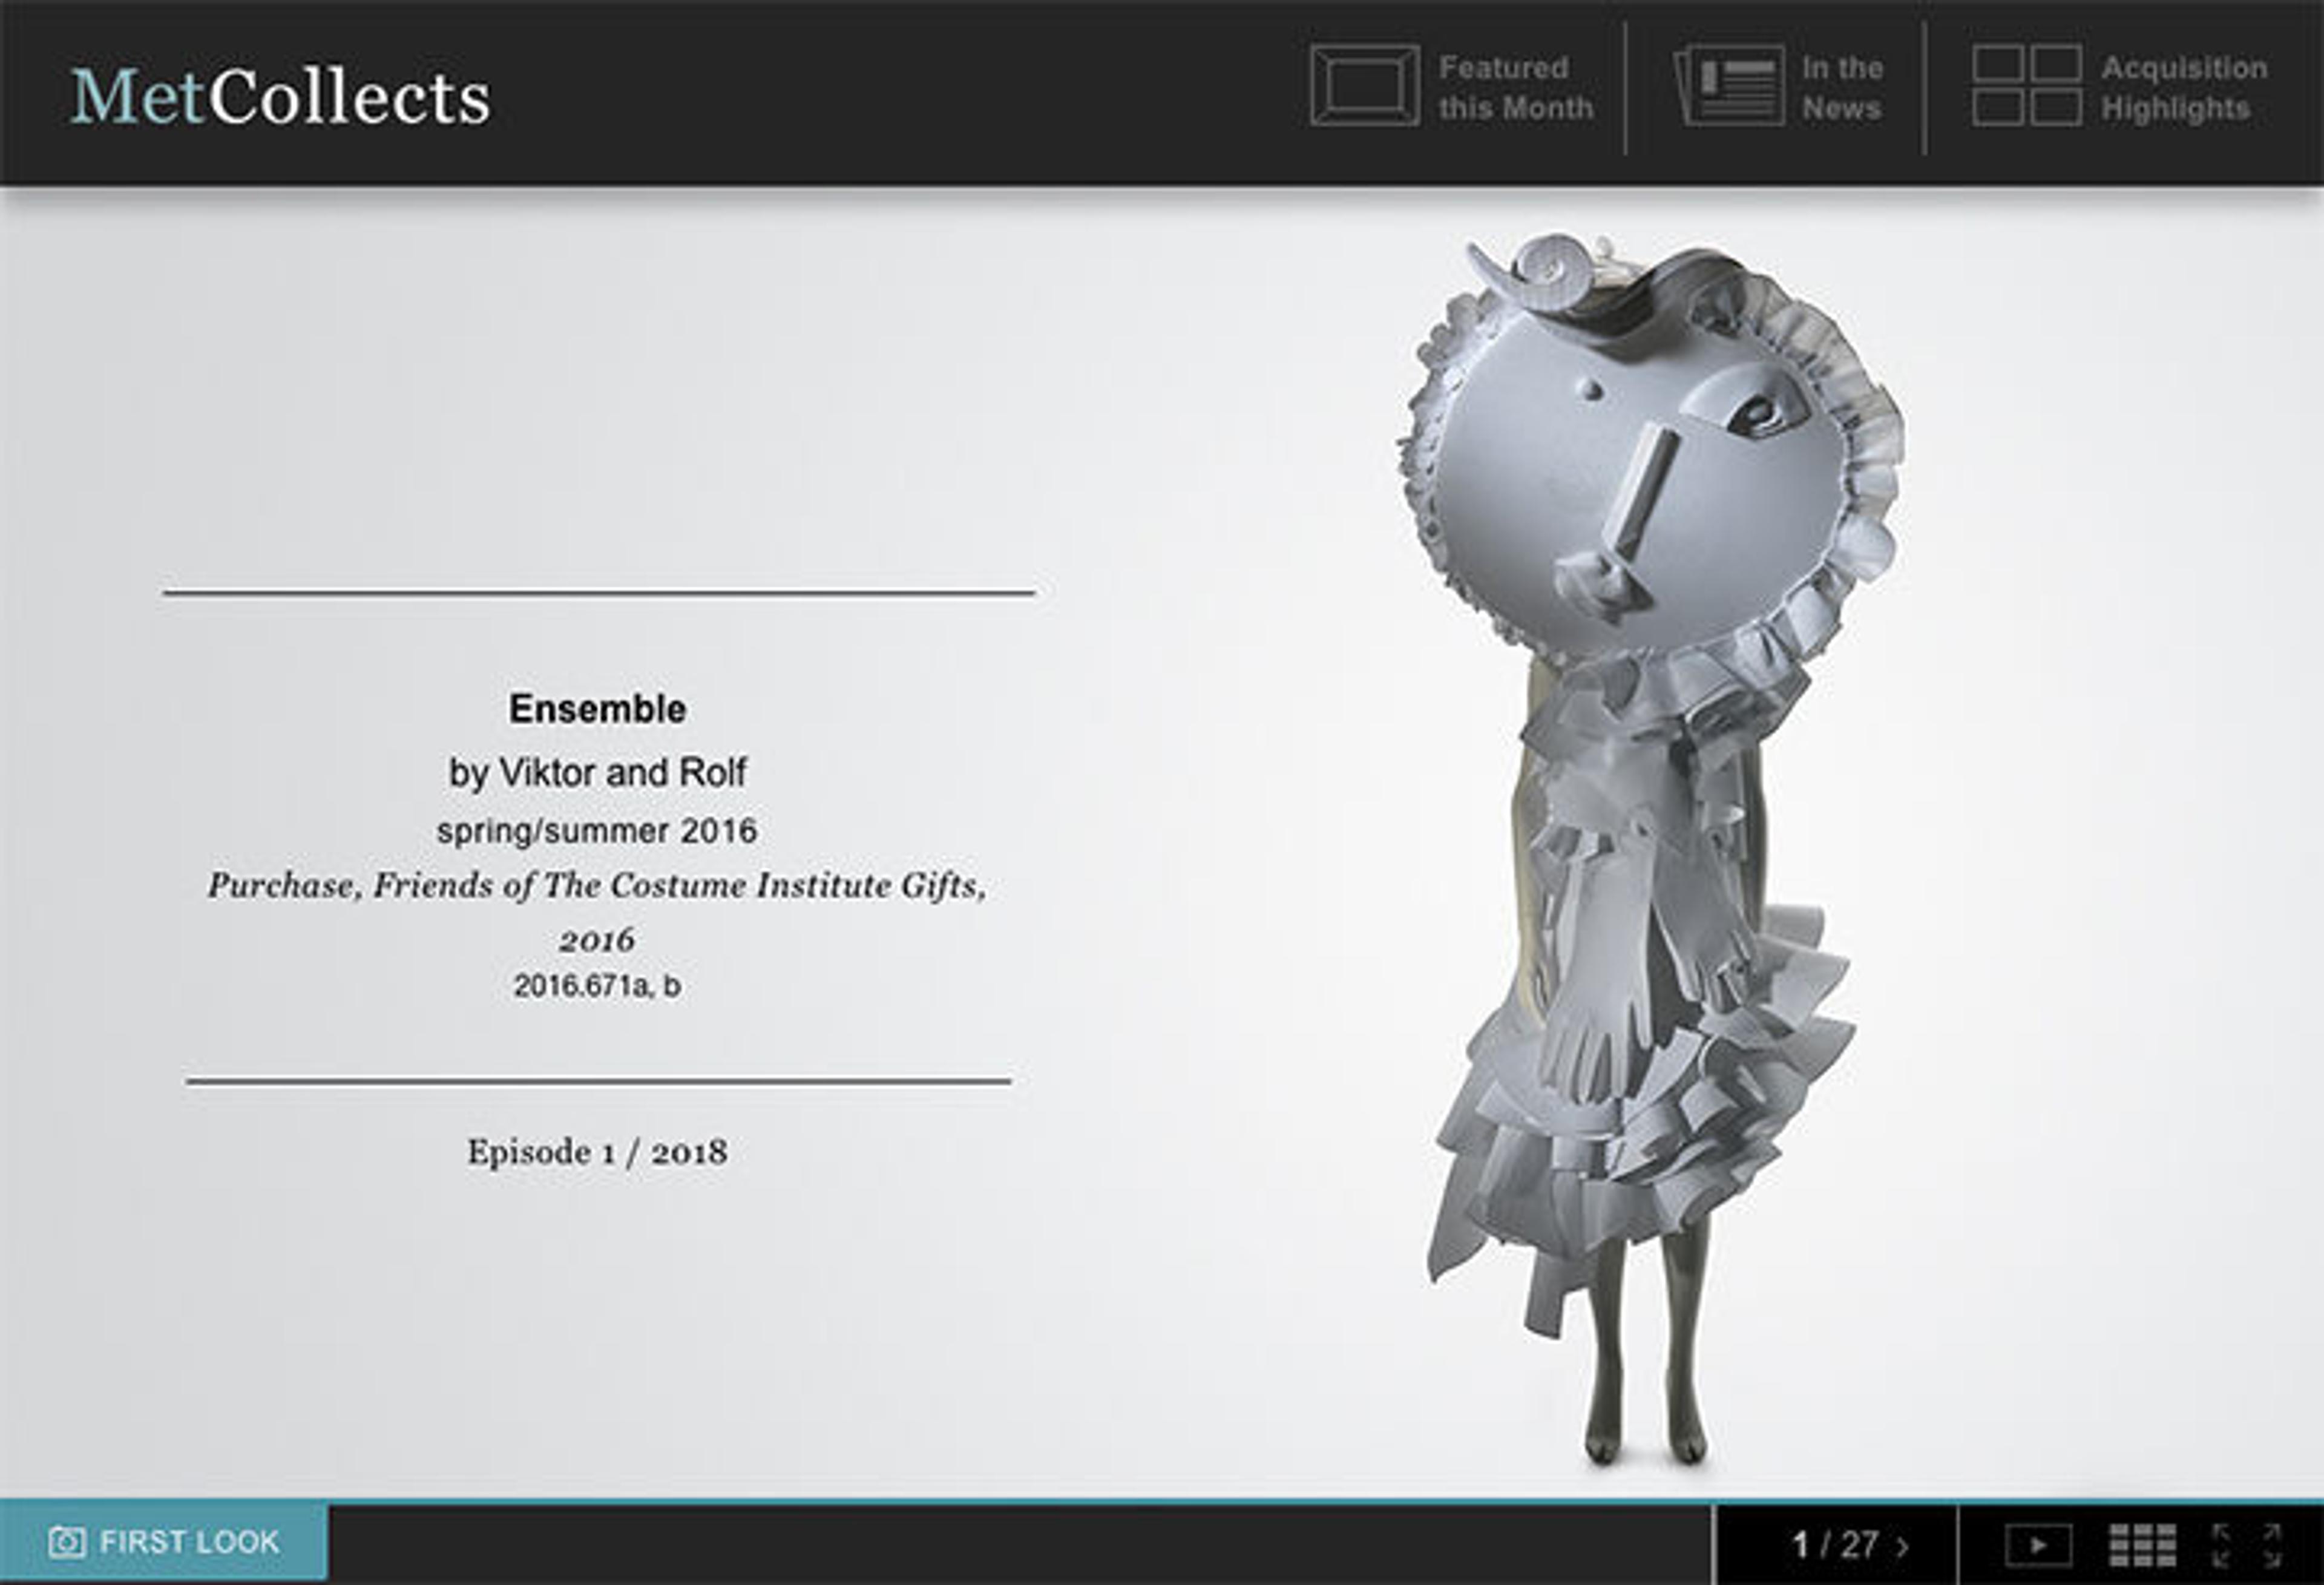 Screenshot of MetCollects showing an Ensmble by Viktor and Rolf